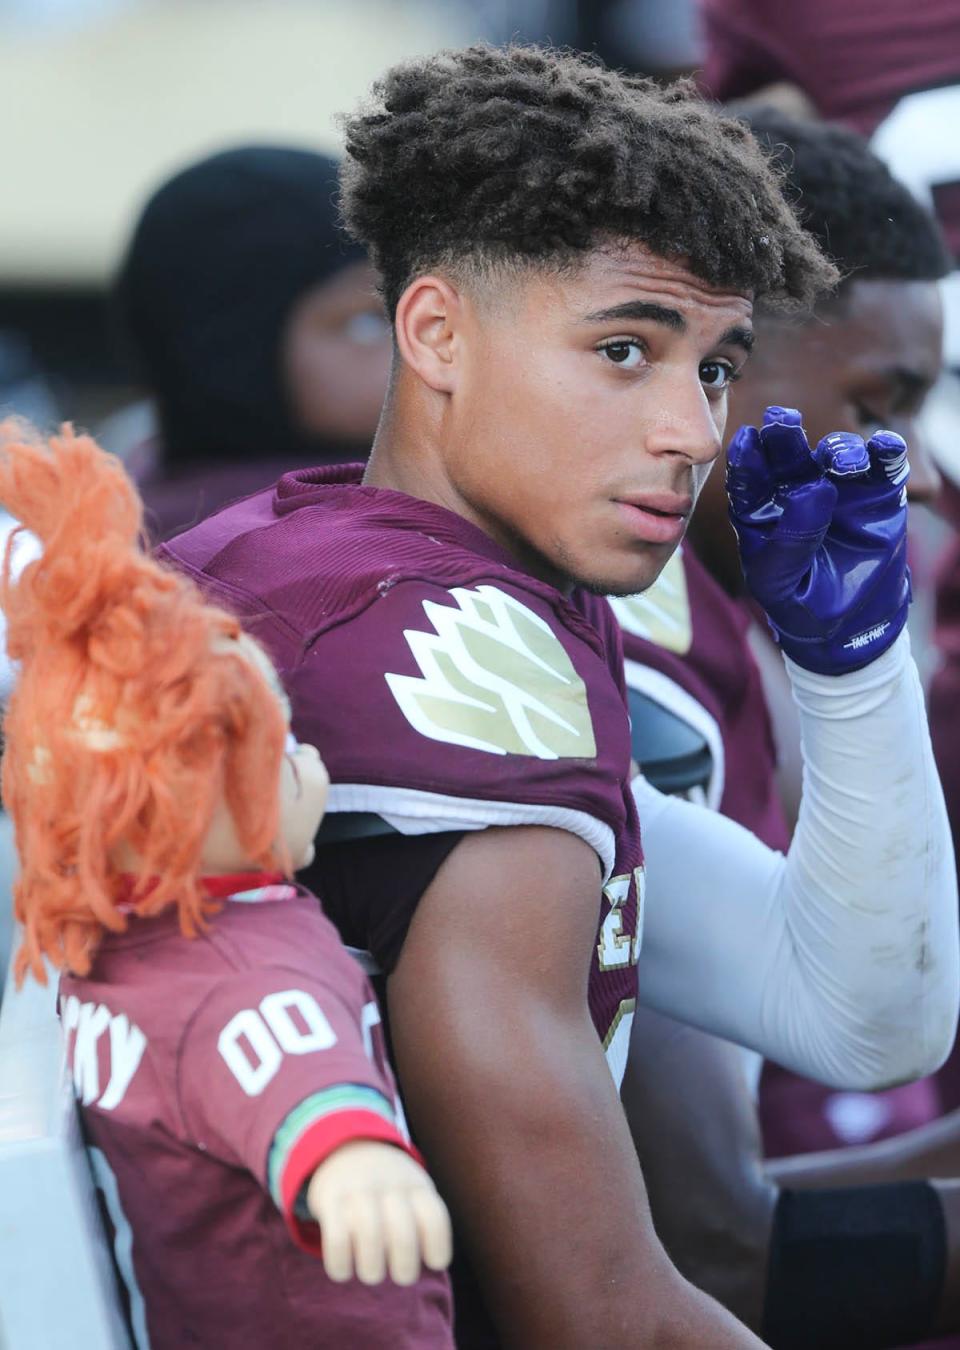 DB Teray Geiger sits next to the infamous “Chucky” doll, which is awarded in game to a player who makes an outstanding play.Geiger made an interception near the end zone during a Niceville Escambia spring football scrimmage at Niceville.